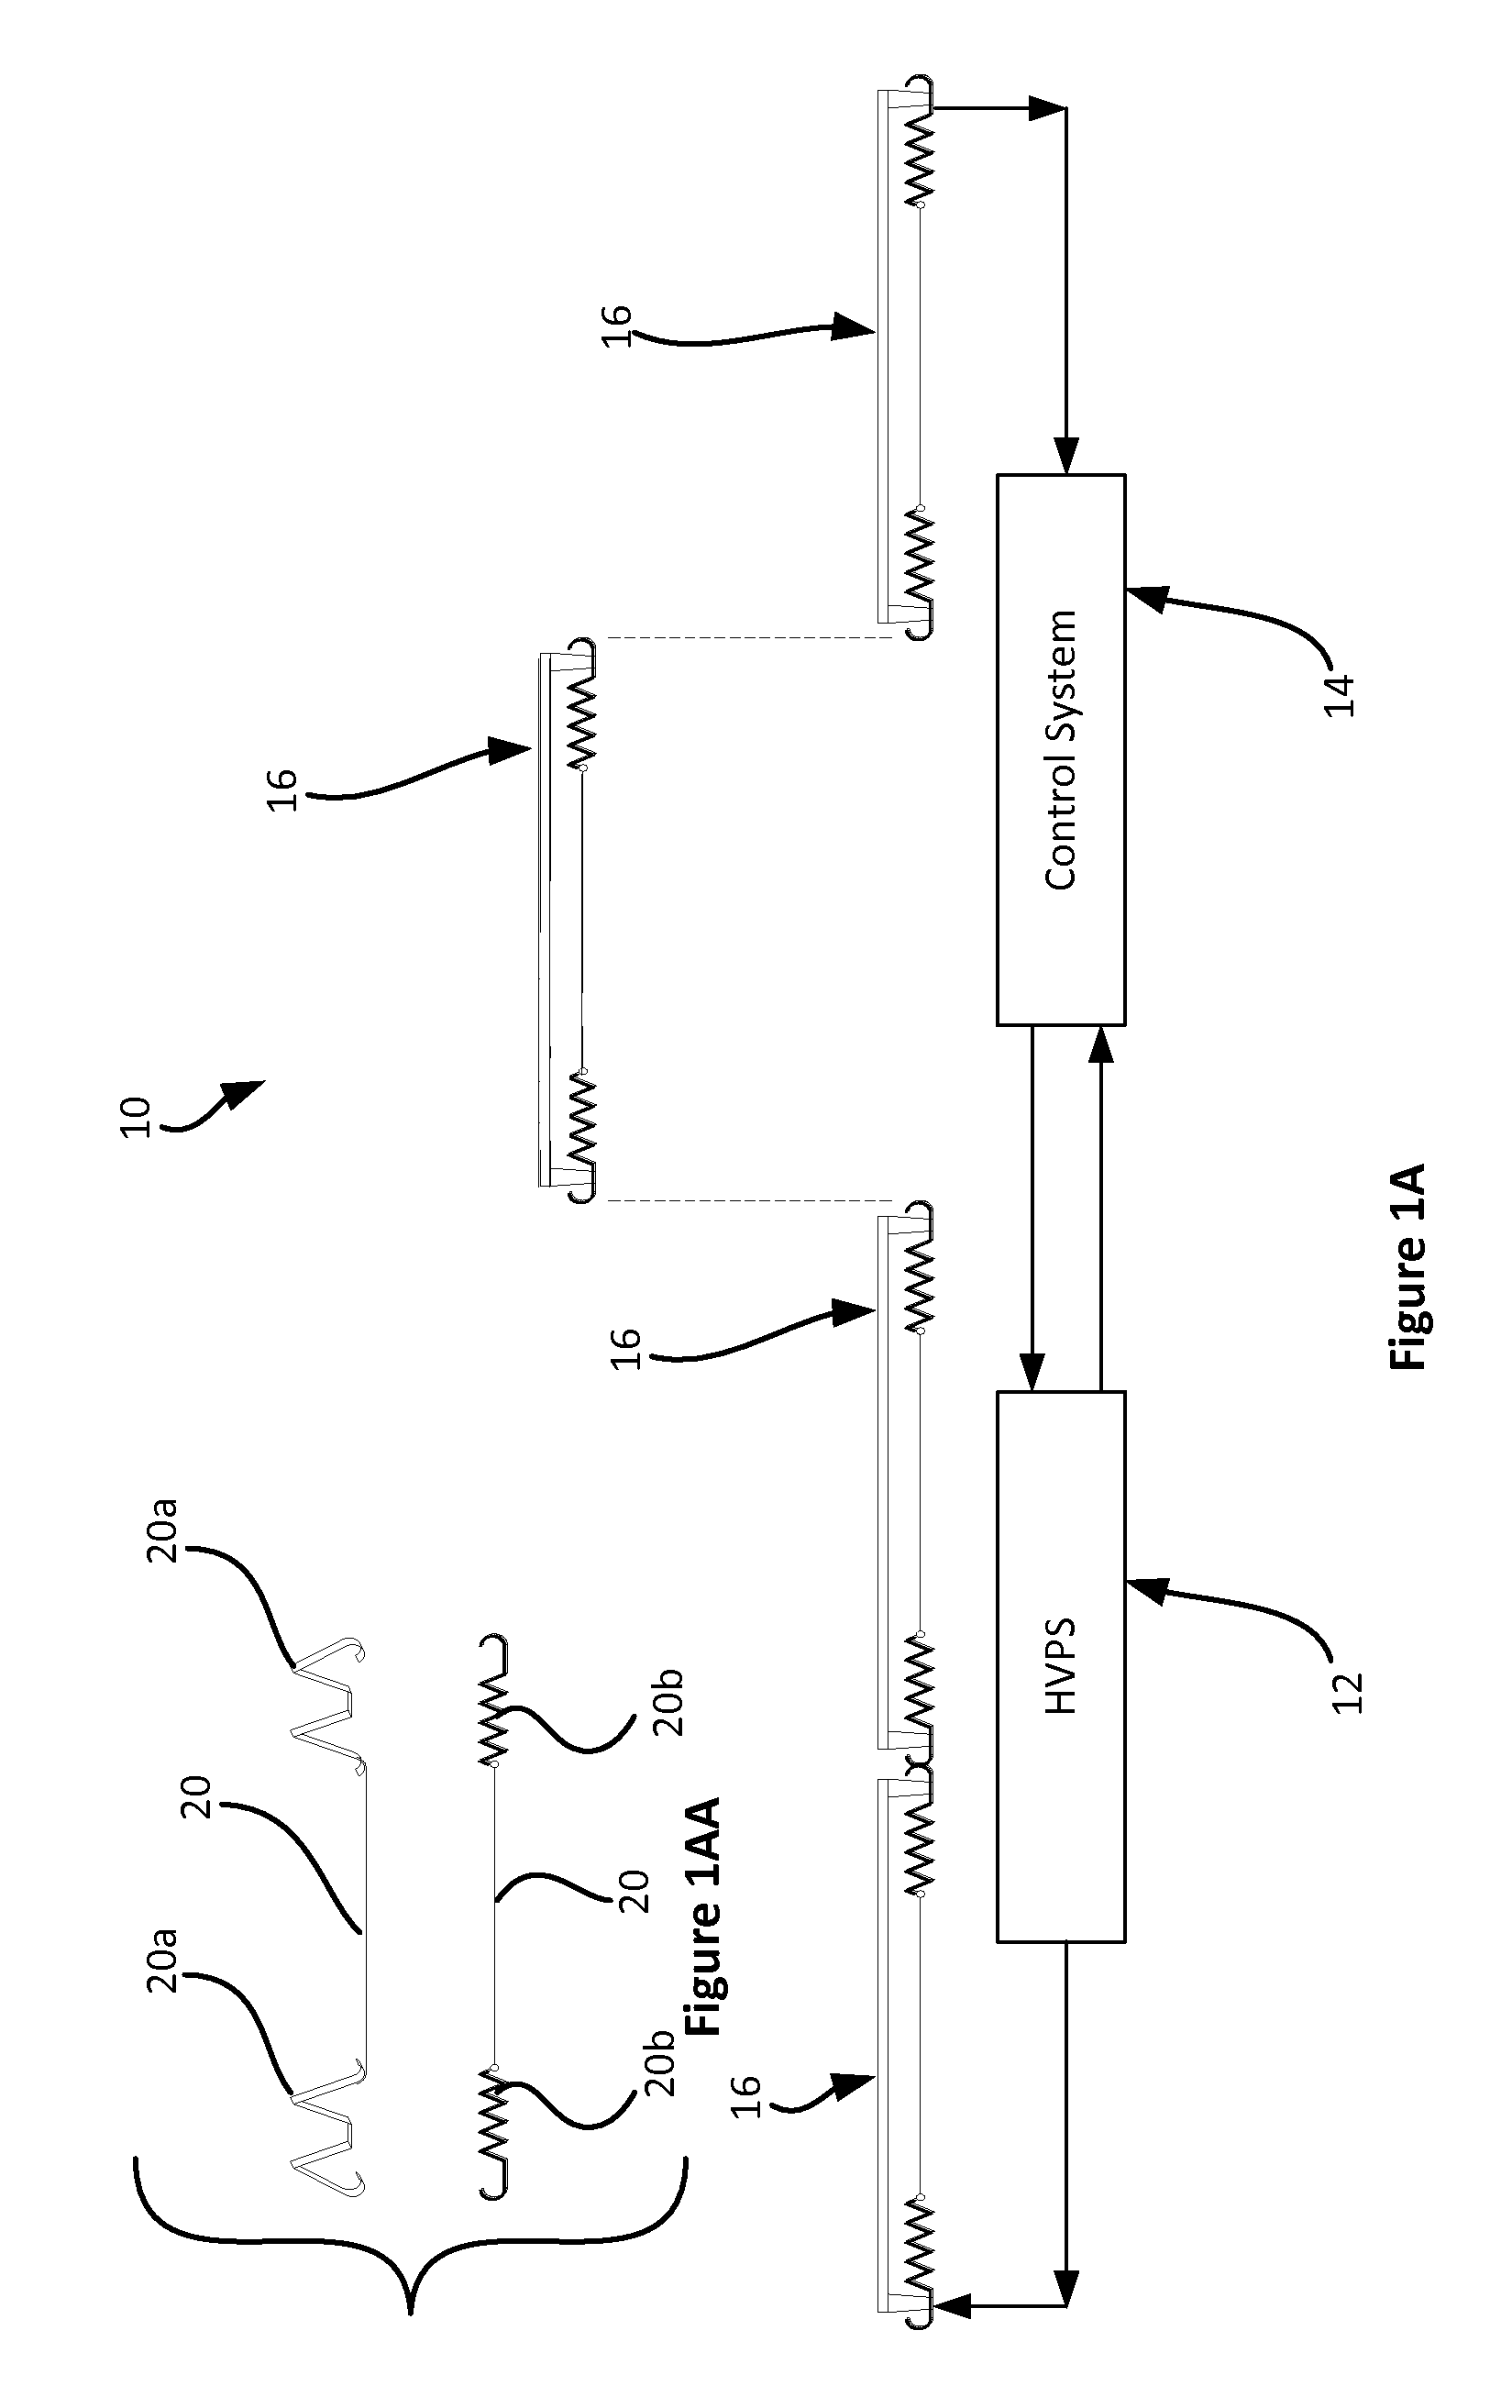 Multi-sectional linear ionizing bar and ionization cell